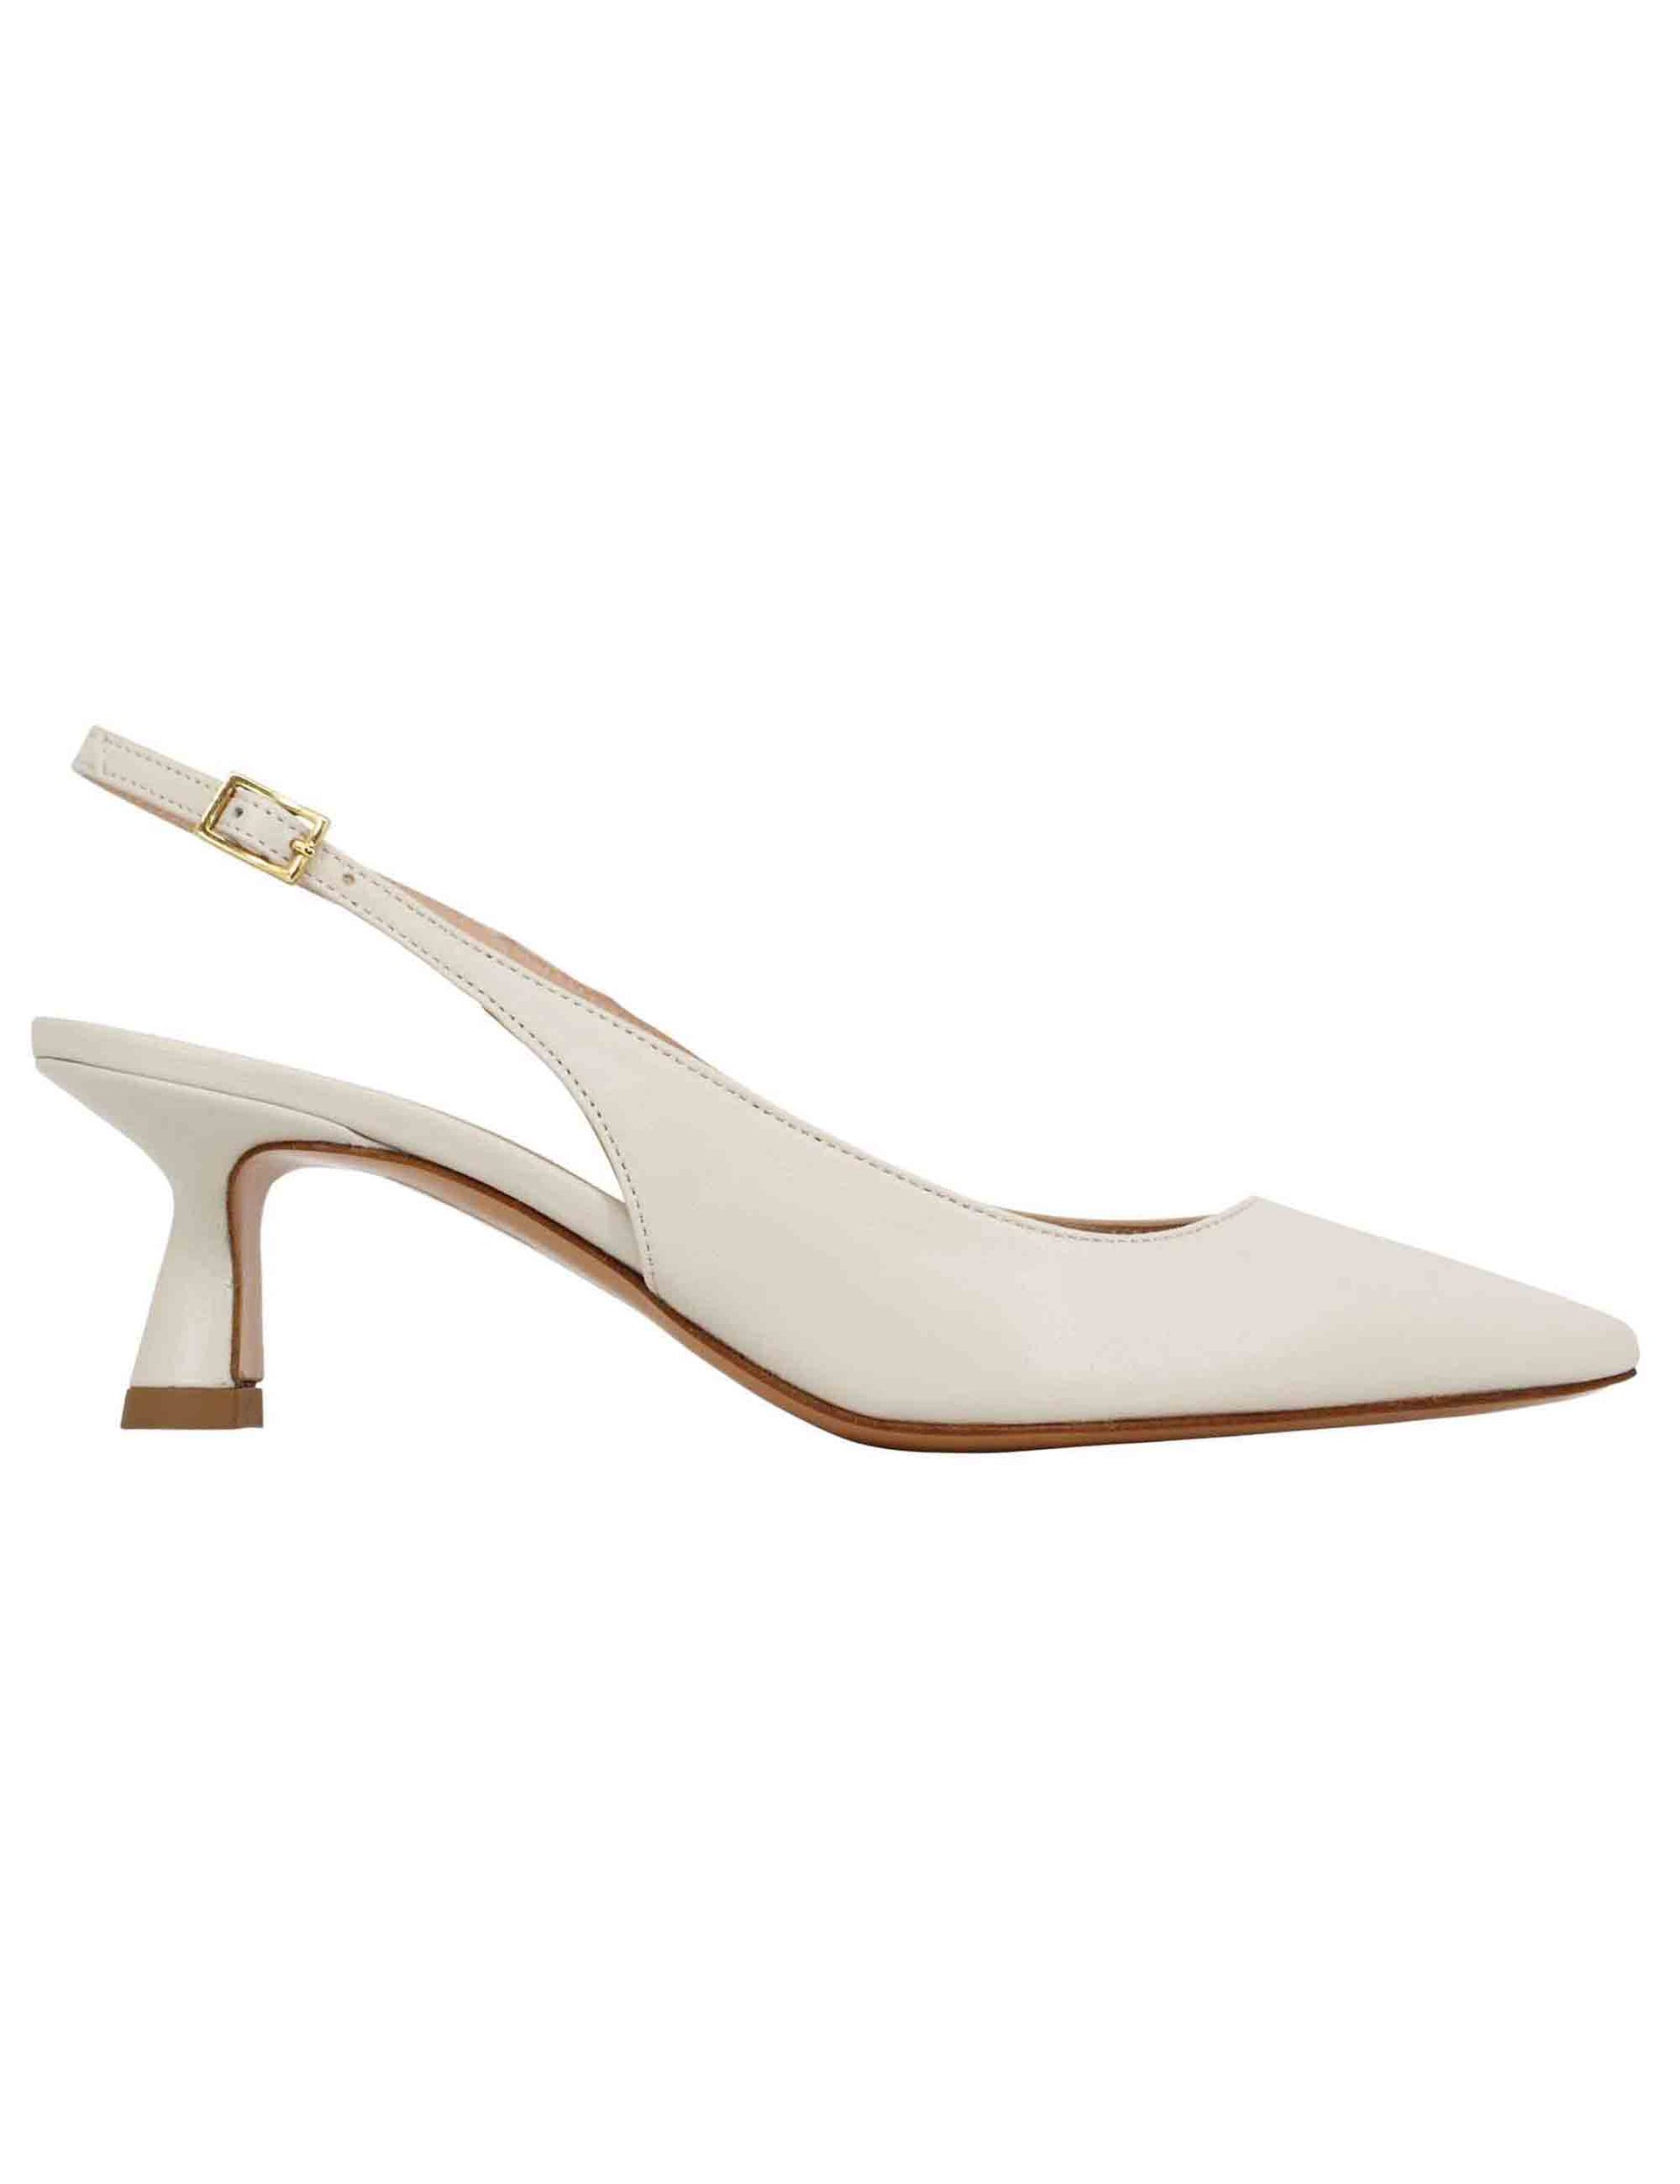 Decollete slingback donna in pelle off white tacco basso